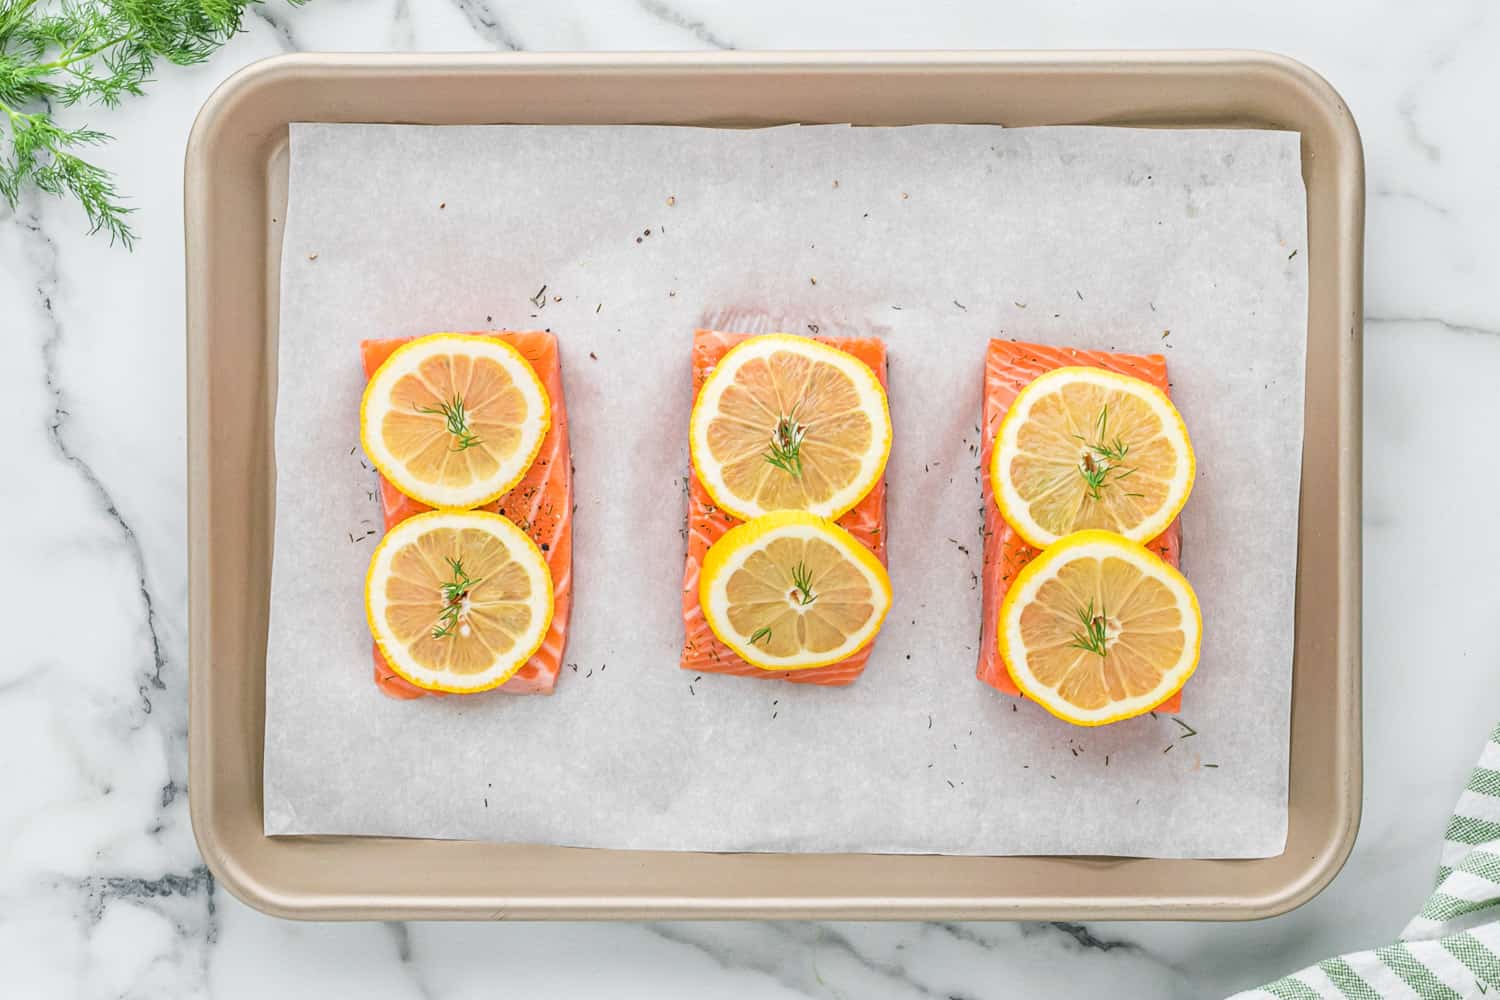 Uncooked salmon topped with lemon slices.